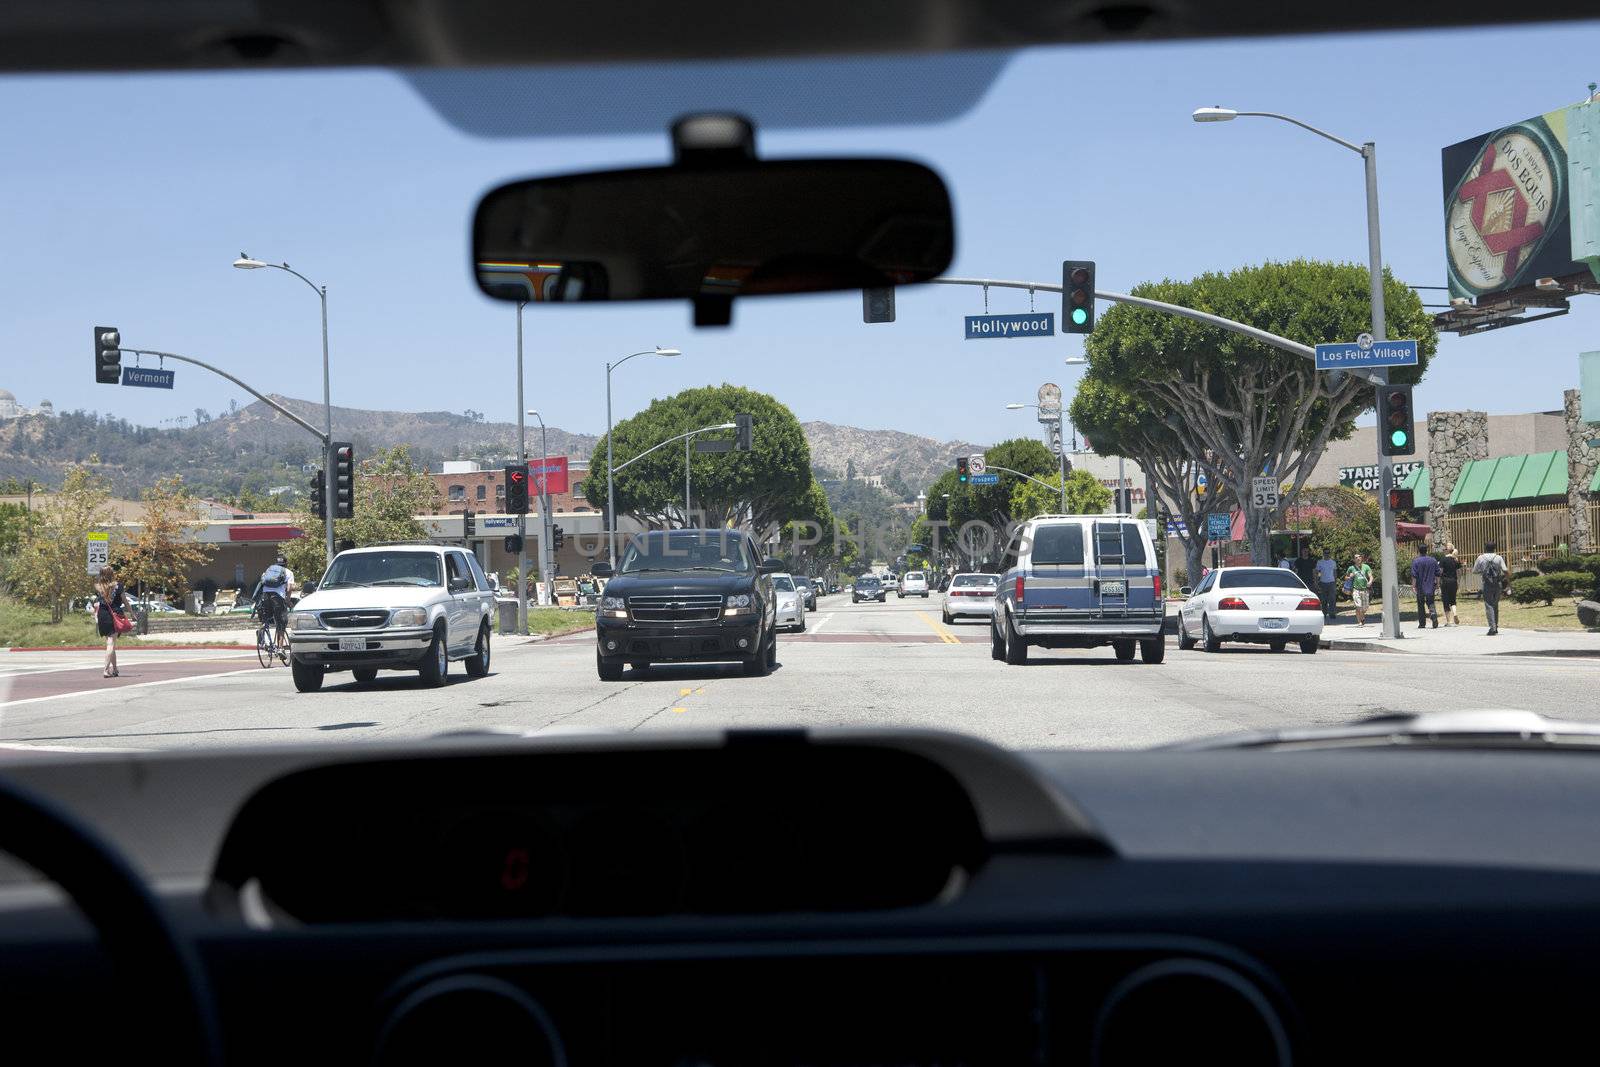 View of Hollywood Boulvard in Los Angeles, CA from a front seat inside a car.